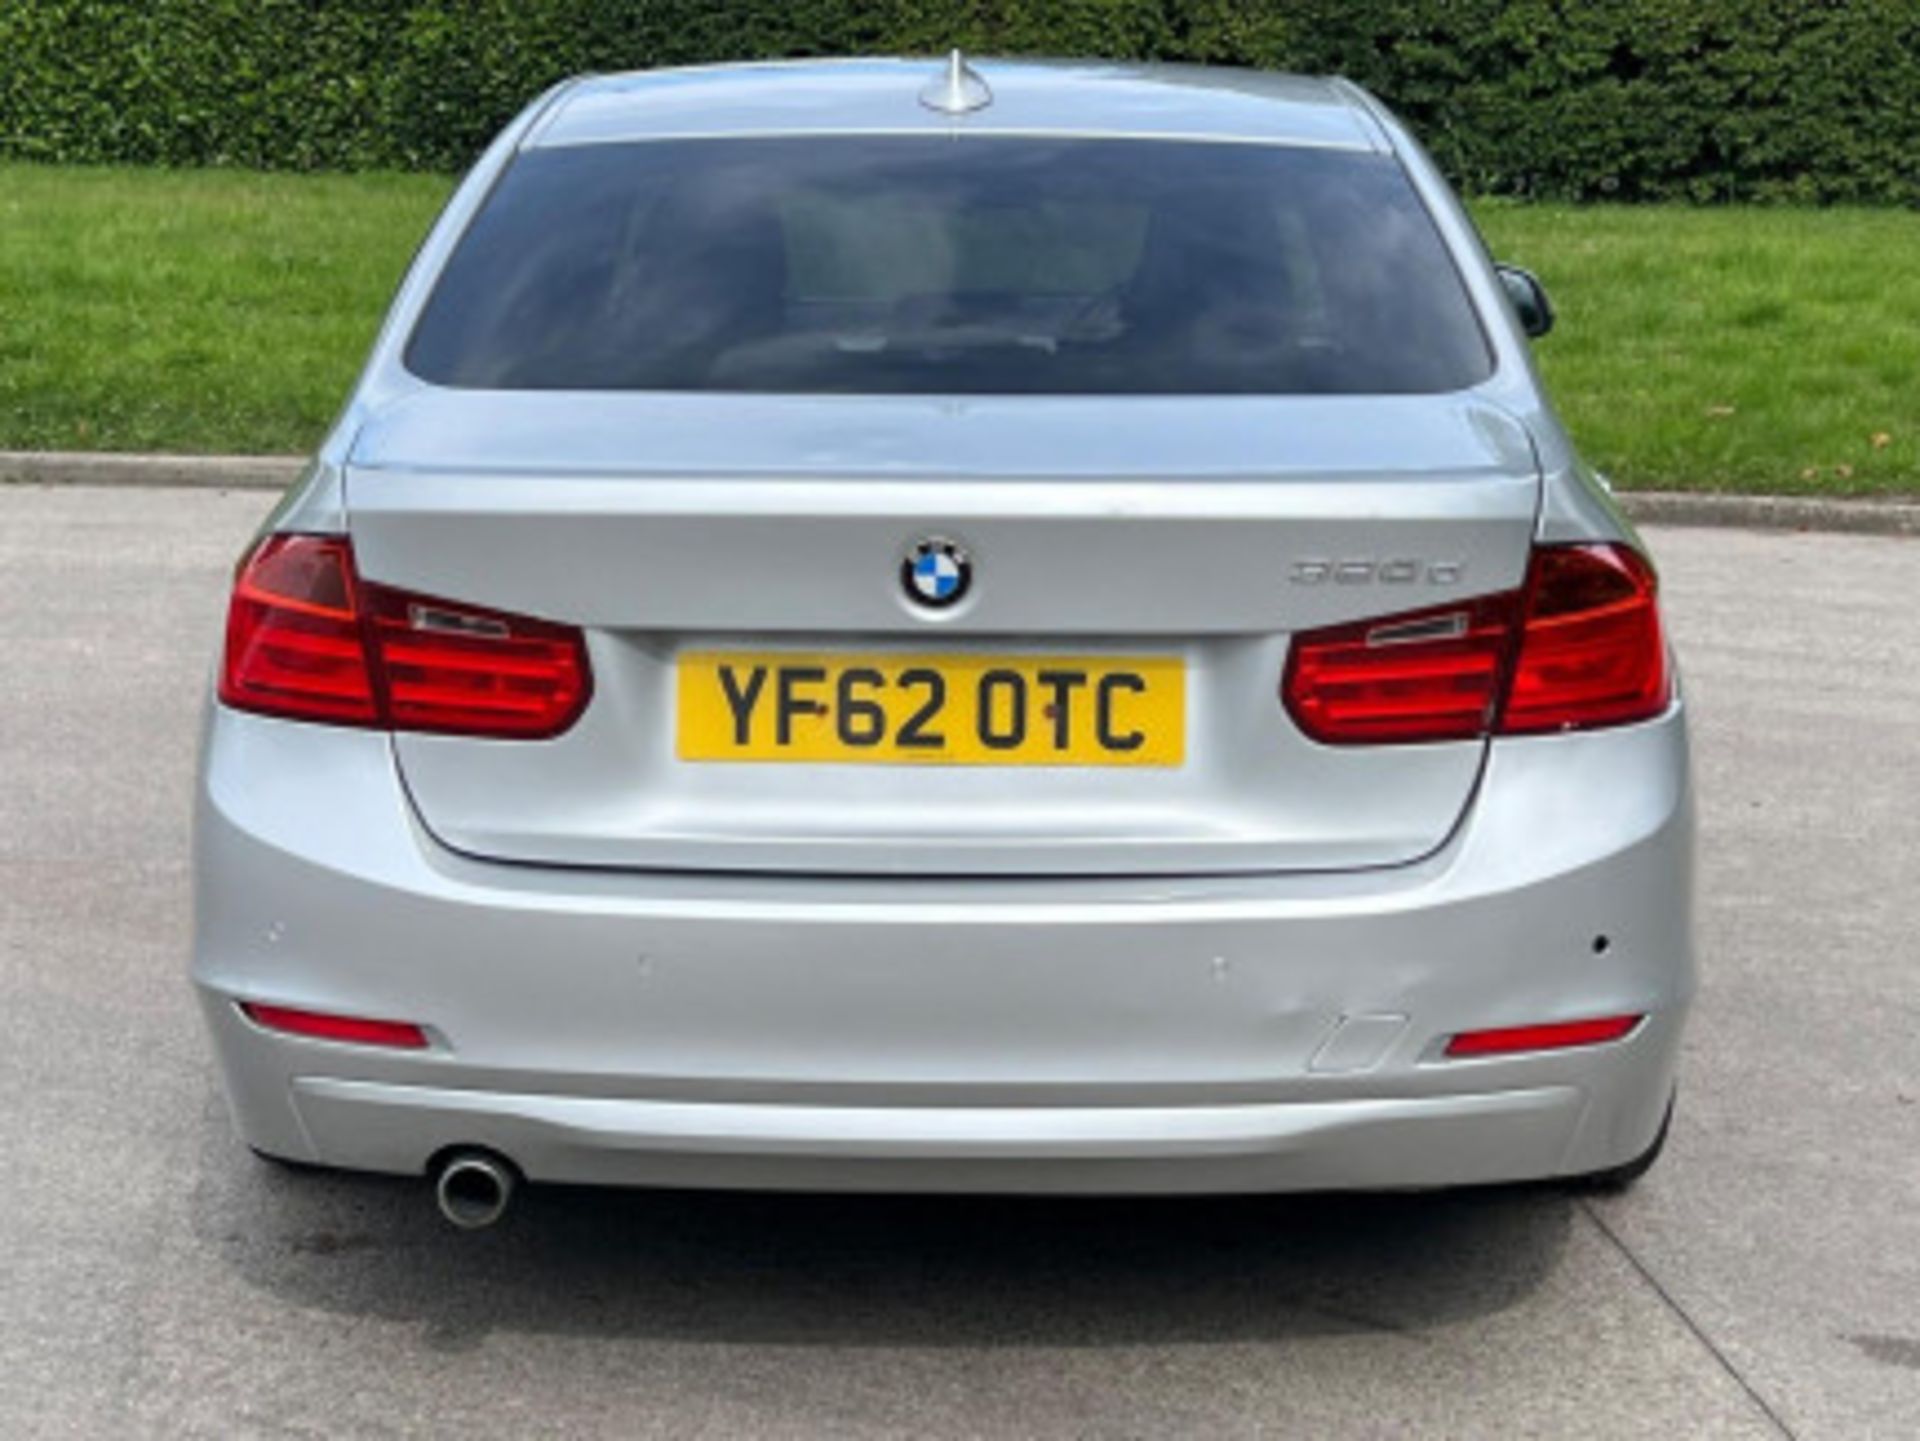 BMW 3 SERIES 2.0 DIESEL ED START STOP - A WELL-MAINTAINED GEM >>--NO VAT ON HAMMER--<< - Image 105 of 229